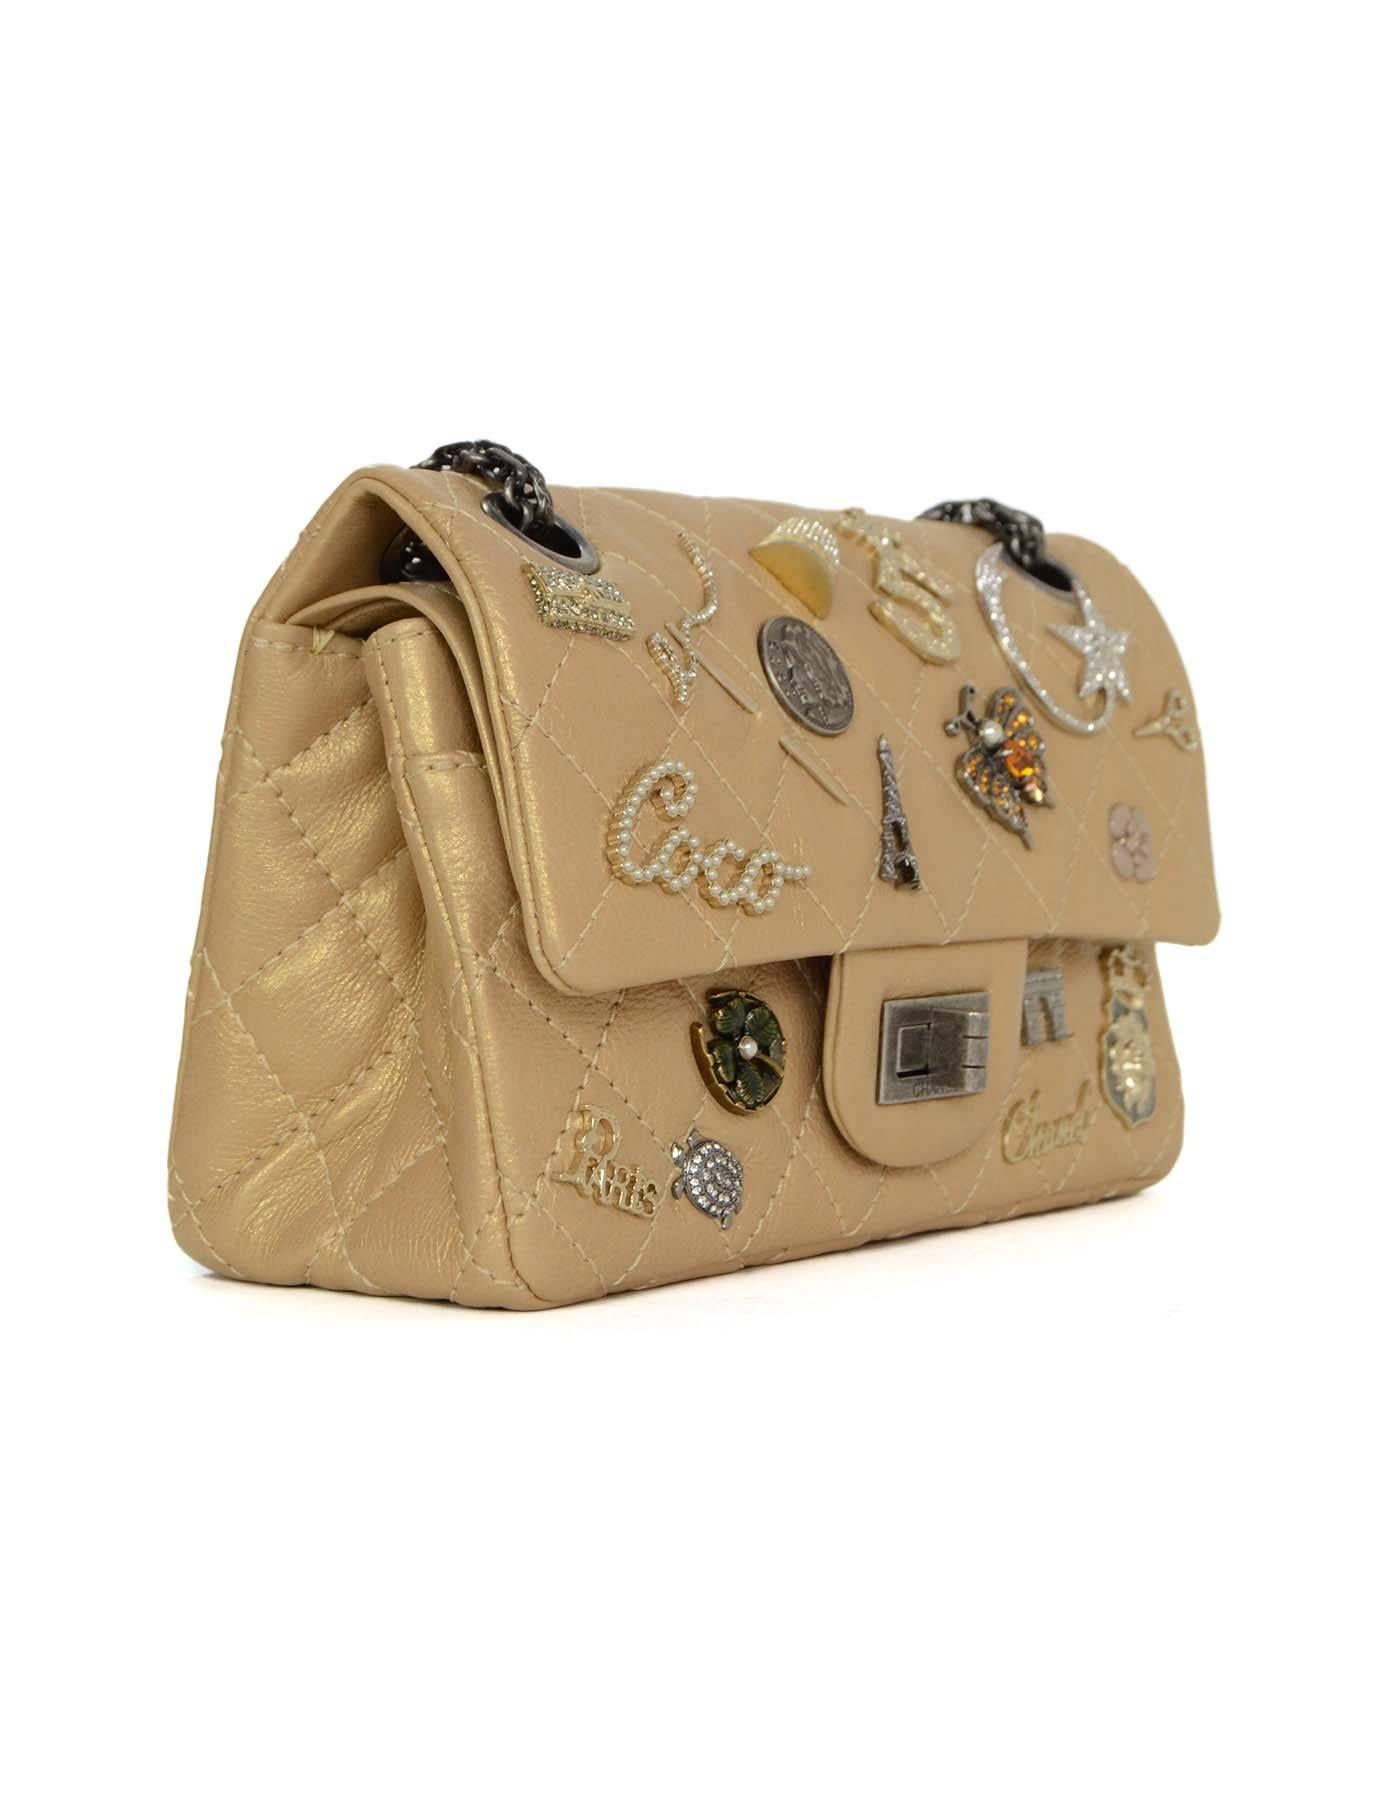 Chanel Gold Distressed Lucky Charms Re-Issue Bag 
Features goldtone, silvertone and multi-colored crystal and faux pearl charms throughout flap top and front panel of bag
Made In: France
Year of Production: 2015
Color: Gold
Hardware: Oxidized